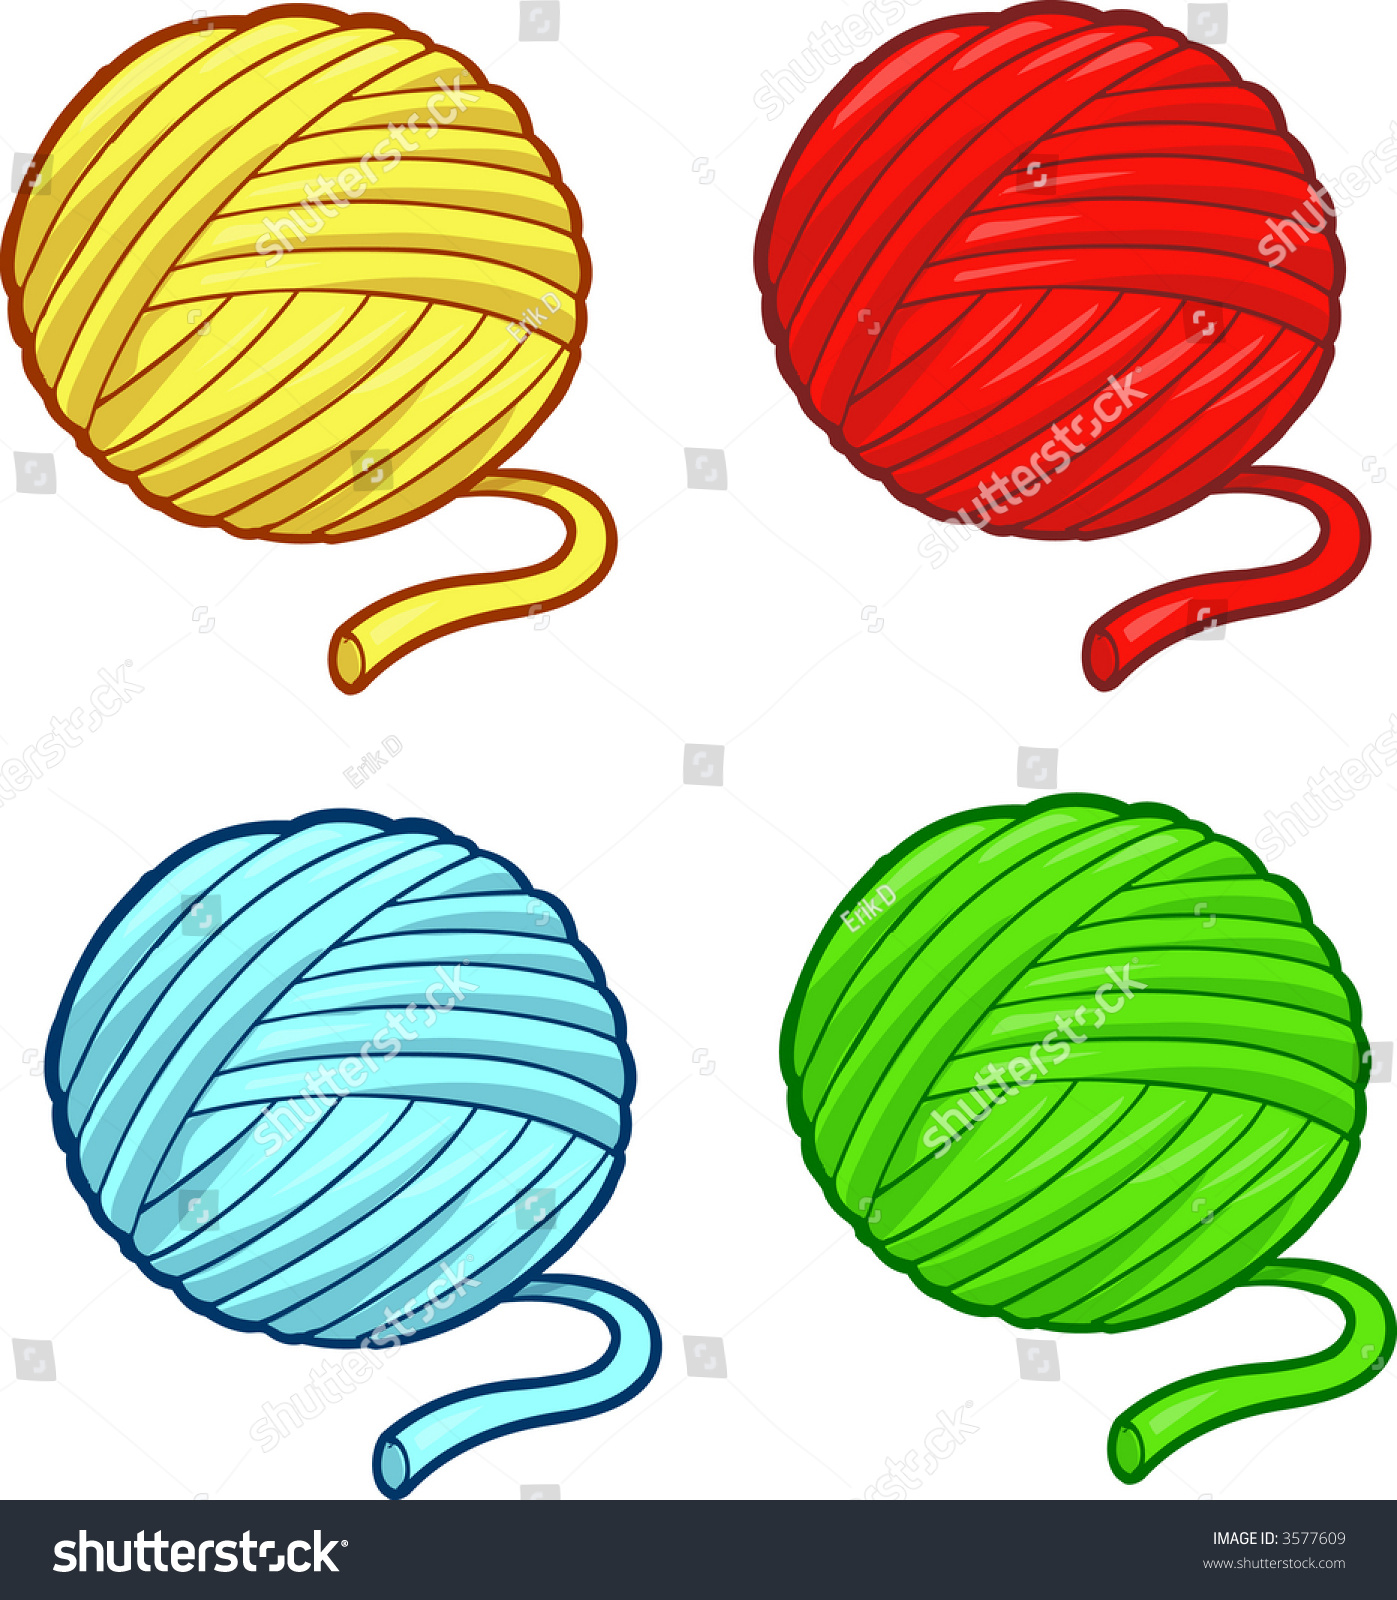 free clipart images yarn - photo #48